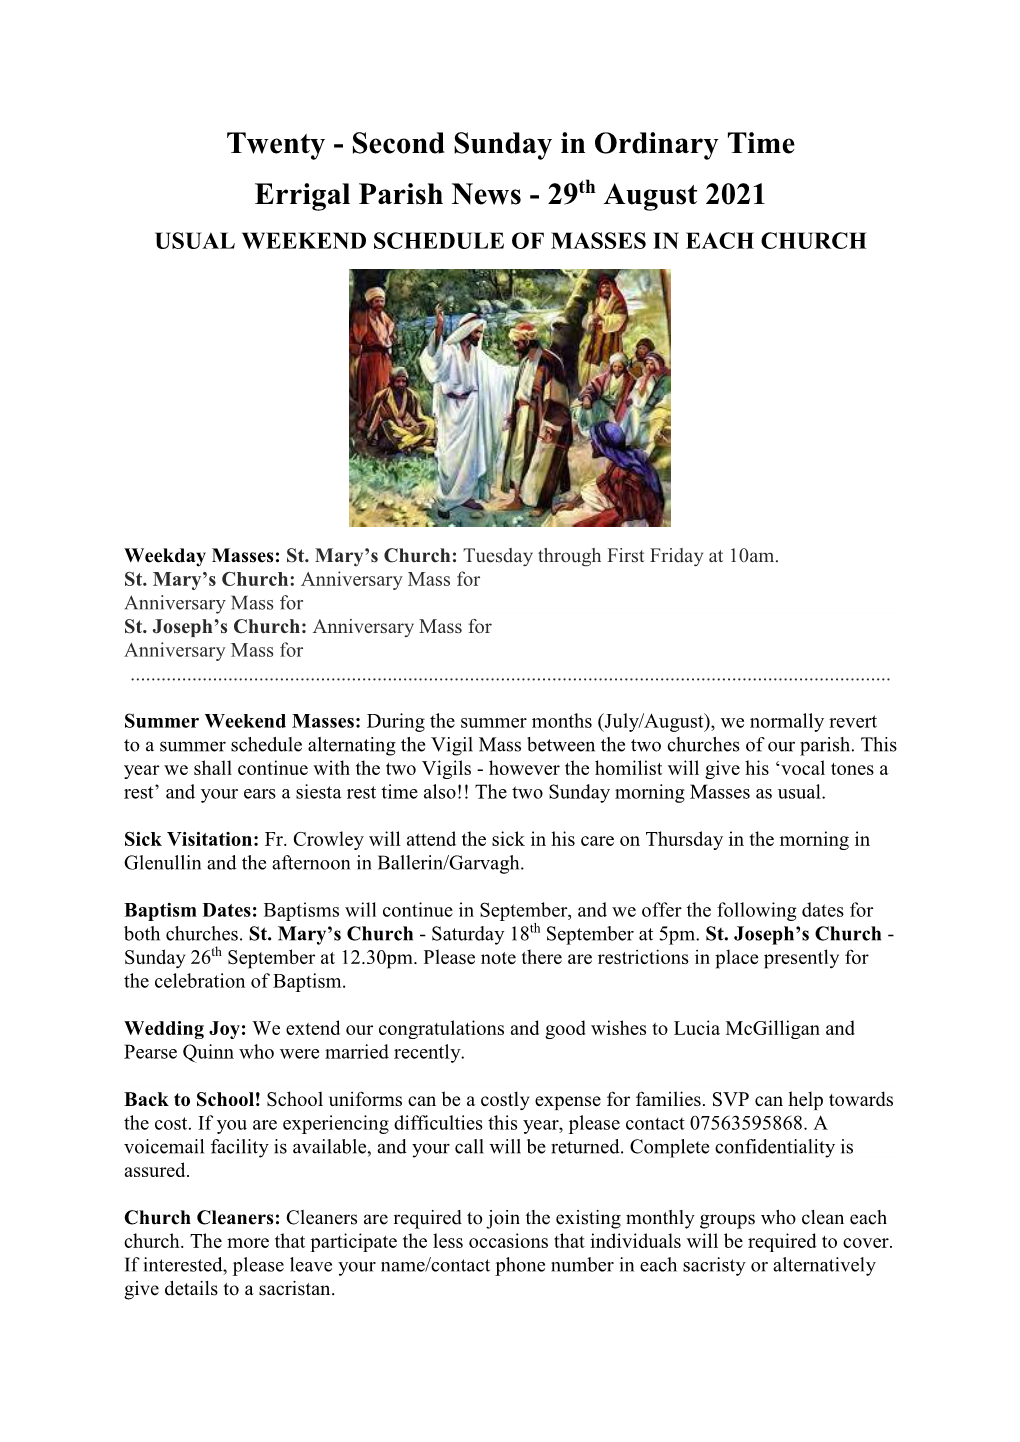 Twenty - Second Sunday in Ordinary Time Errigal Parish News - 29Th August 2021 USUAL WEEKEND SCHEDULE of MASSES in EACH CHURCH